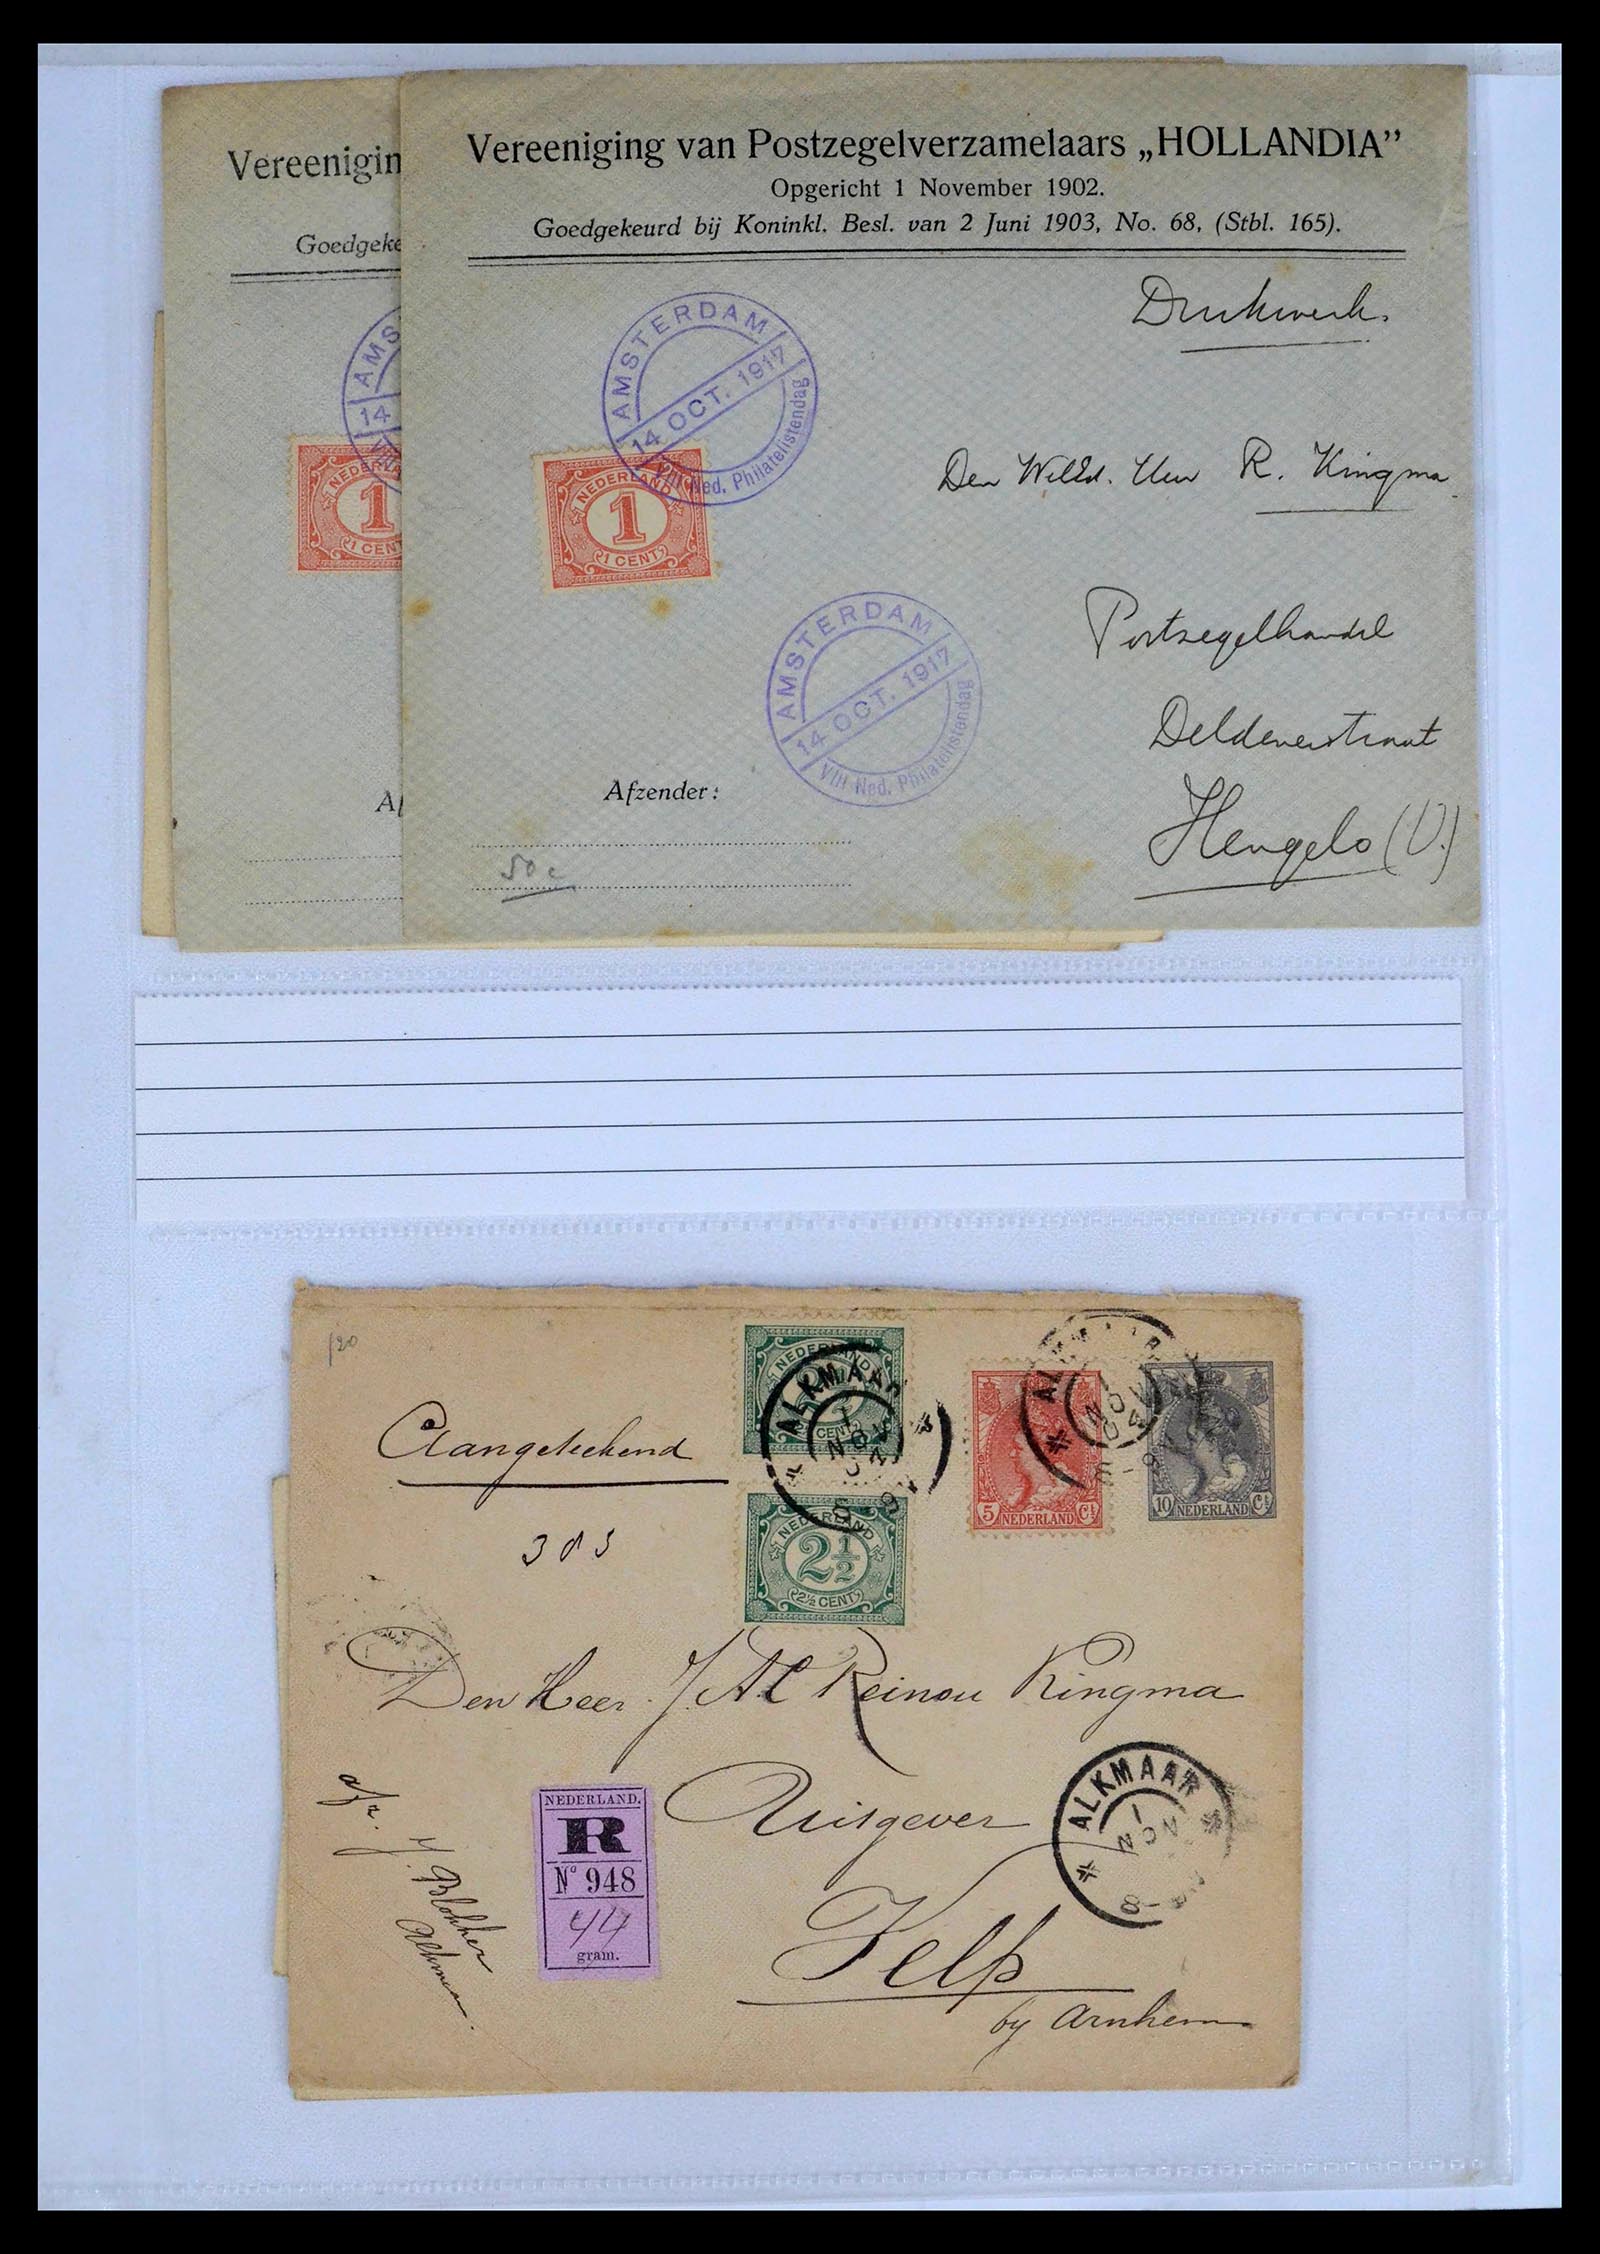 39429 0015 - Stamp collection 39429 Netherlands covers 1821-1955.